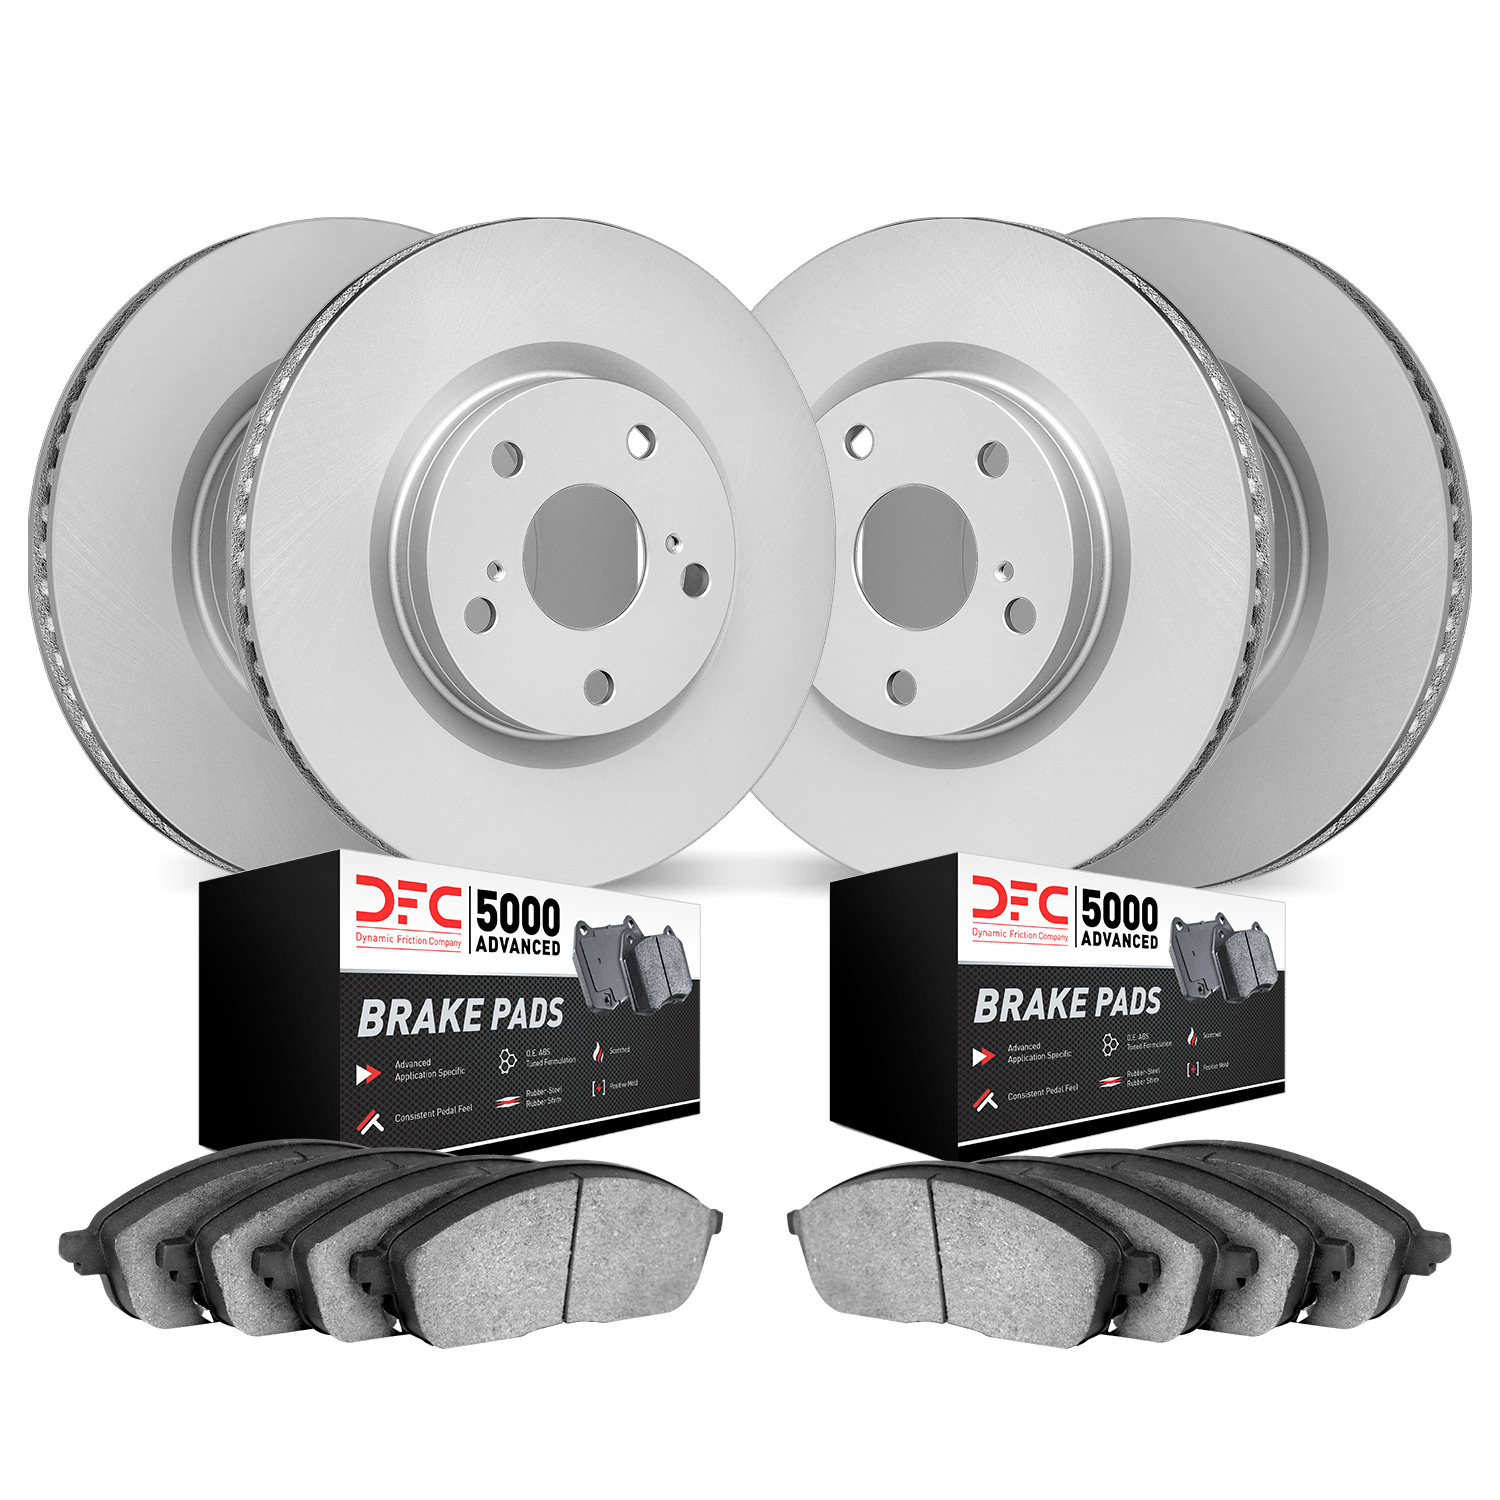 4504-45017 Geospec Brake Rotors w/5000 Advanced Brake Pads Kit, 2014-2014 GM, Position: Front and Rear